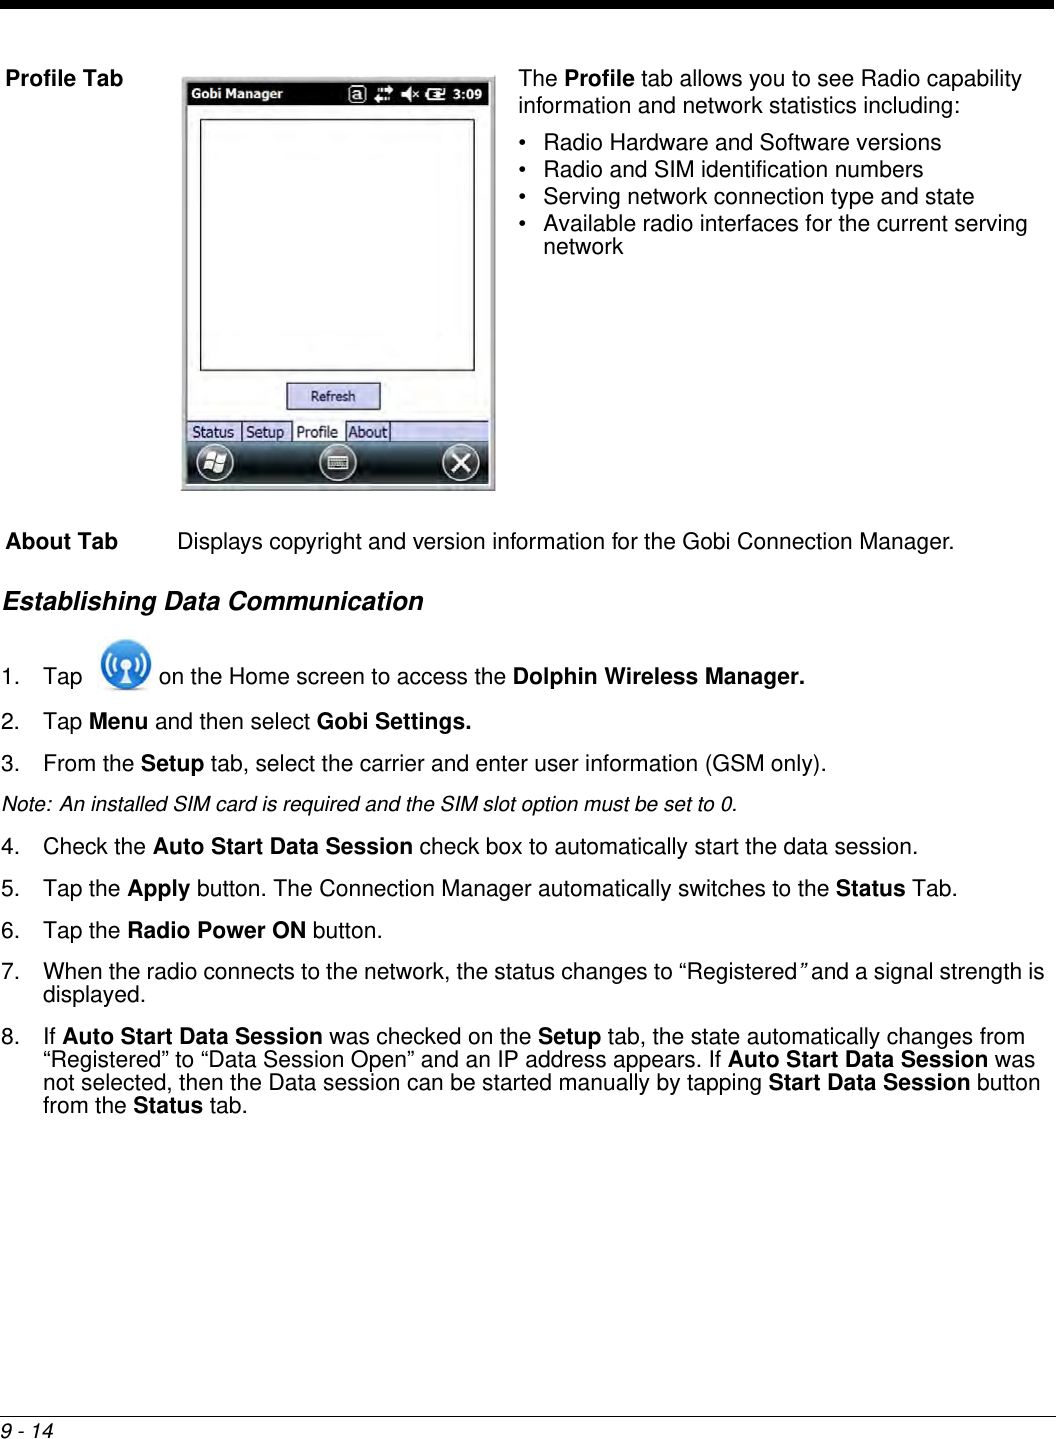 9 - 14Establishing Data Communication1. Tap   on the Home screen to access the Dolphin Wireless Manager.2. Tap Menu and then select Gobi Settings. 3. From the Setup tab, select the carrier and enter user information (GSM only). Note: An installed SIM card is required and the SIM slot option must be set to 0.4. Check the Auto Start Data Session check box to automatically start the data session.5. Tap the Apply button. The Connection Manager automatically switches to the Status Tab.6. Tap the Radio Power ON button.7. When the radio connects to the network, the status changes to “Registered” and a signal strength is displayed.8. If Auto Start Data Session was checked on the Setup tab, the state automatically changes from “Registered” to “Data Session Open” and an IP address appears. If Auto Start Data Session was not selected, then the Data session can be started manually by tapping Start Data Session button from the Status tab.Profile Tab The Profile tab allows you to see Radio capability information and network statistics including: • Radio Hardware and Software versions• Radio and SIM identification numbers• Serving network connection type and state• Available radio interfaces for the current serving networkAbout Tab Displays copyright and version information for the Gobi Connection Manager.